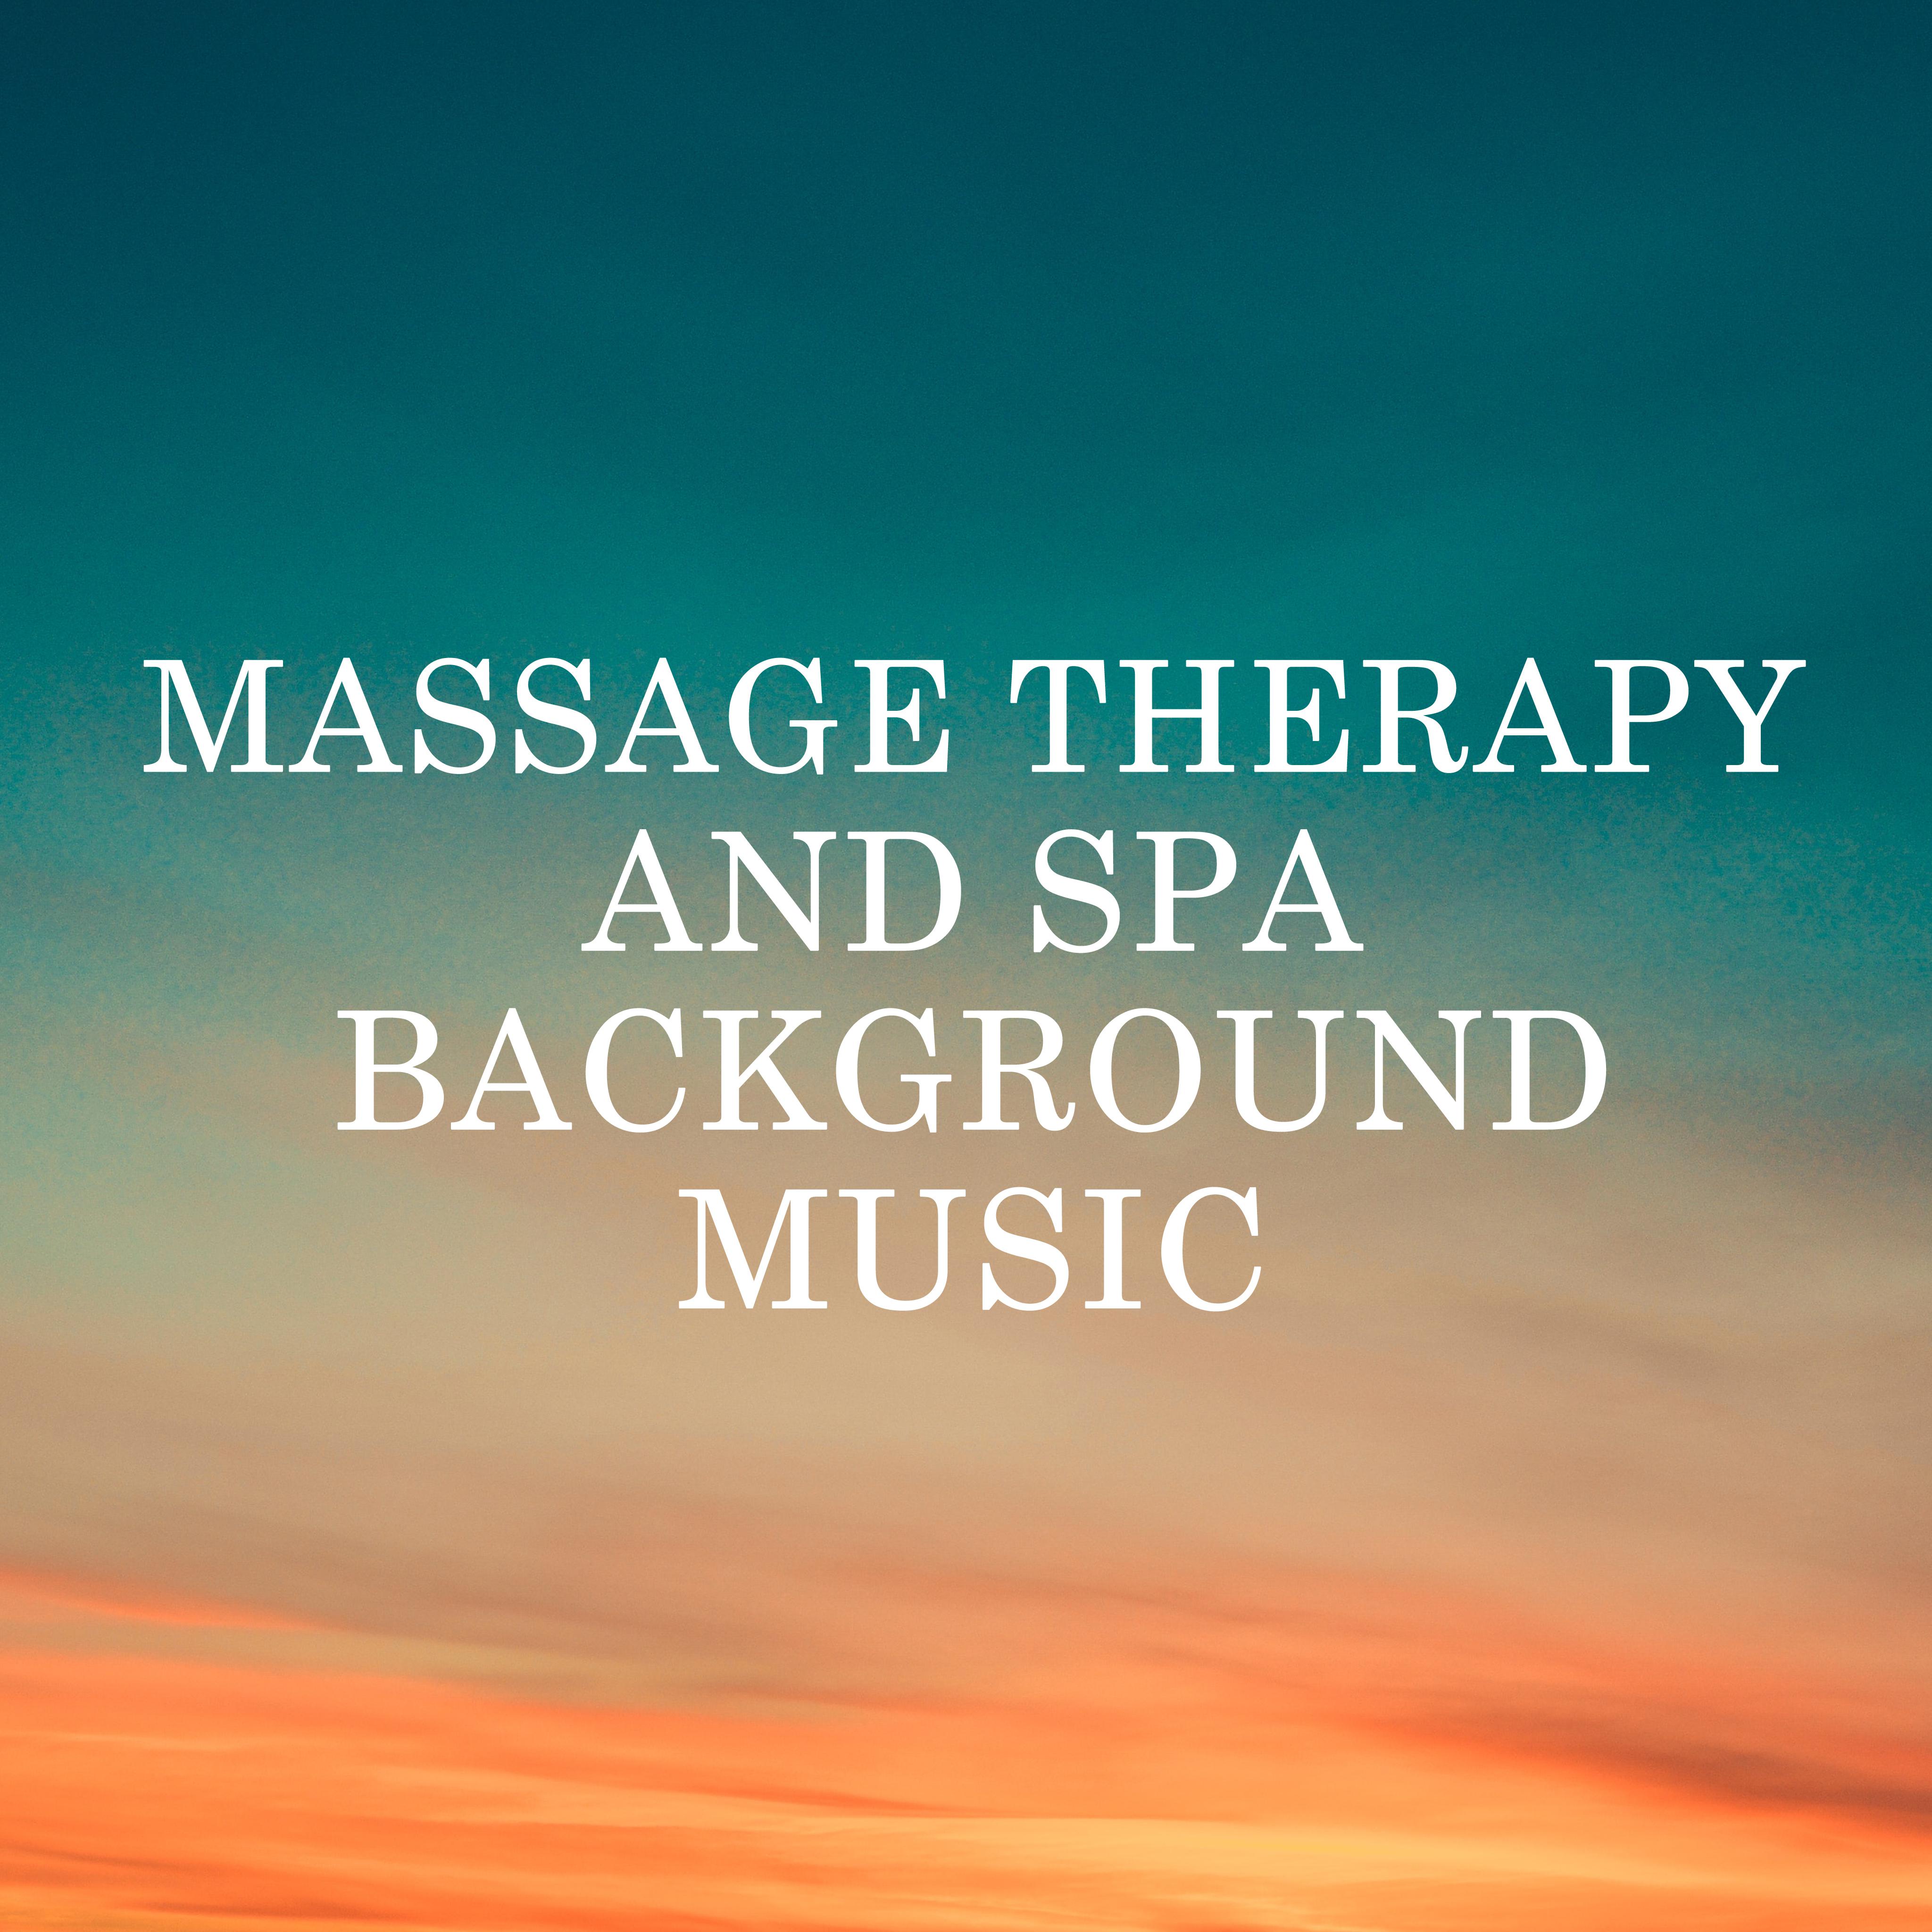 19 Massage Therapy and Spa Background